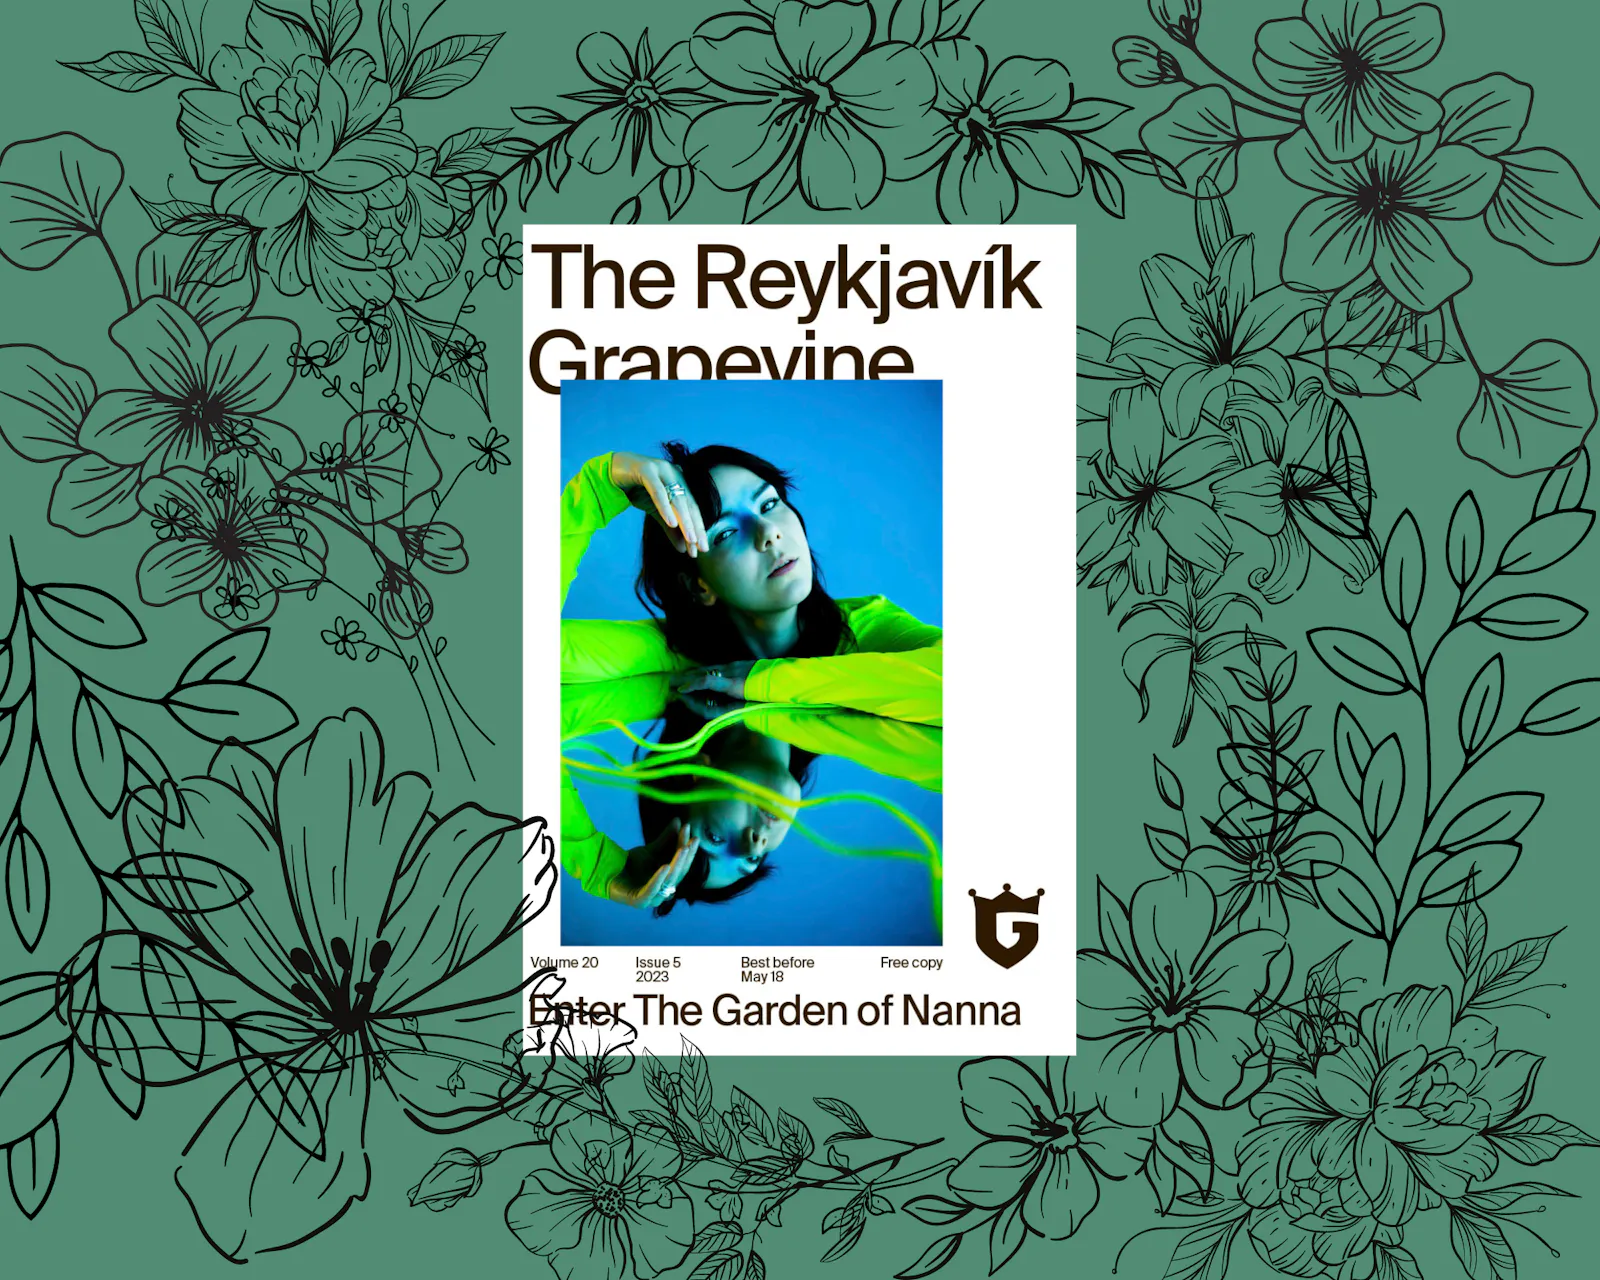 Cover of The Reykjavík Grapevine, Vol. 20, Issue 5